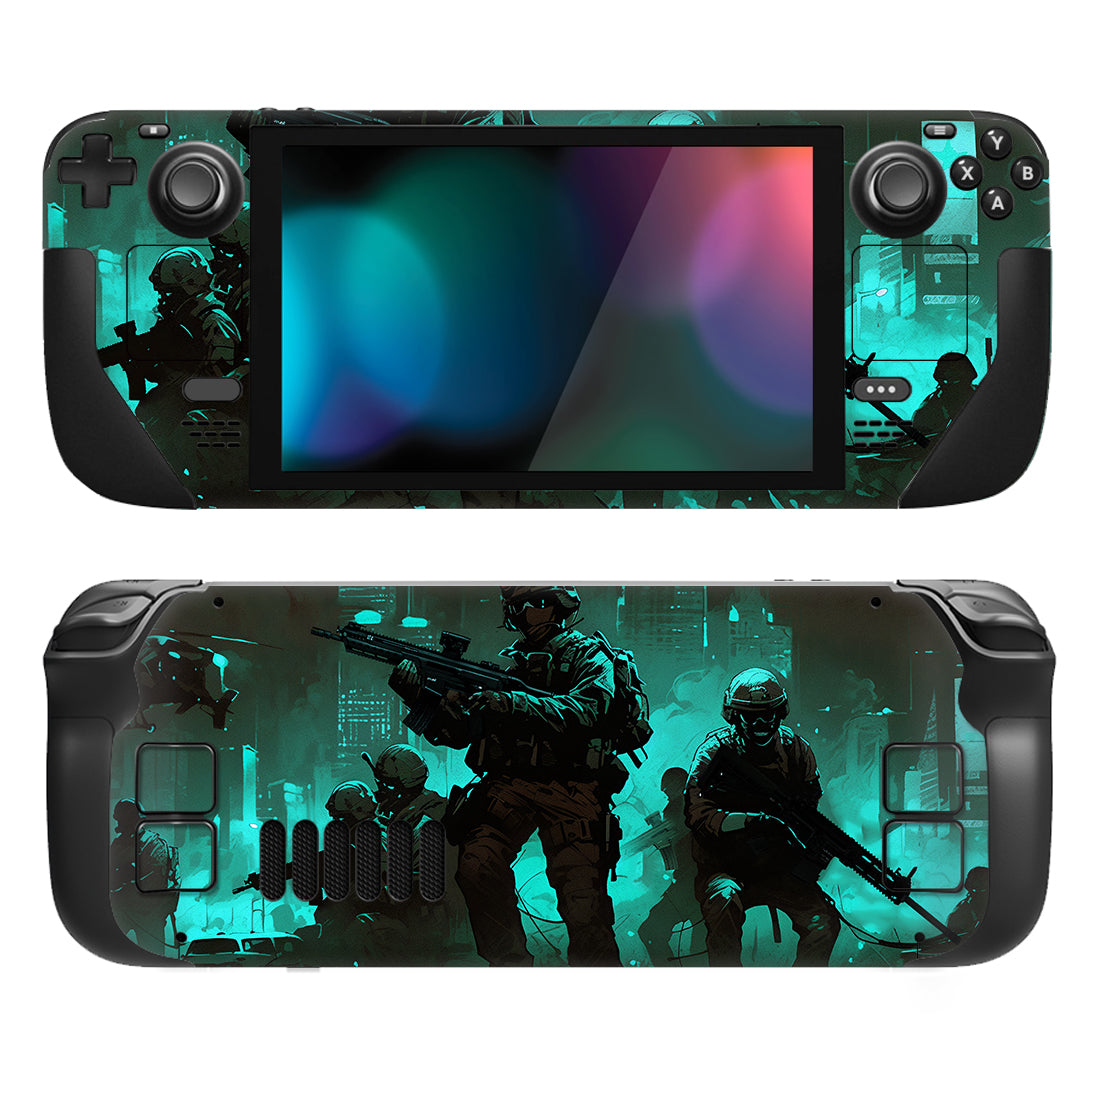 PlayVital Full Set Protective Skin Decal for Steam Deck, Custom Stickers Vinyl Cover for Steam Deck Handheld Gaming PC - Fearlessness - SDTM083 PlayVital